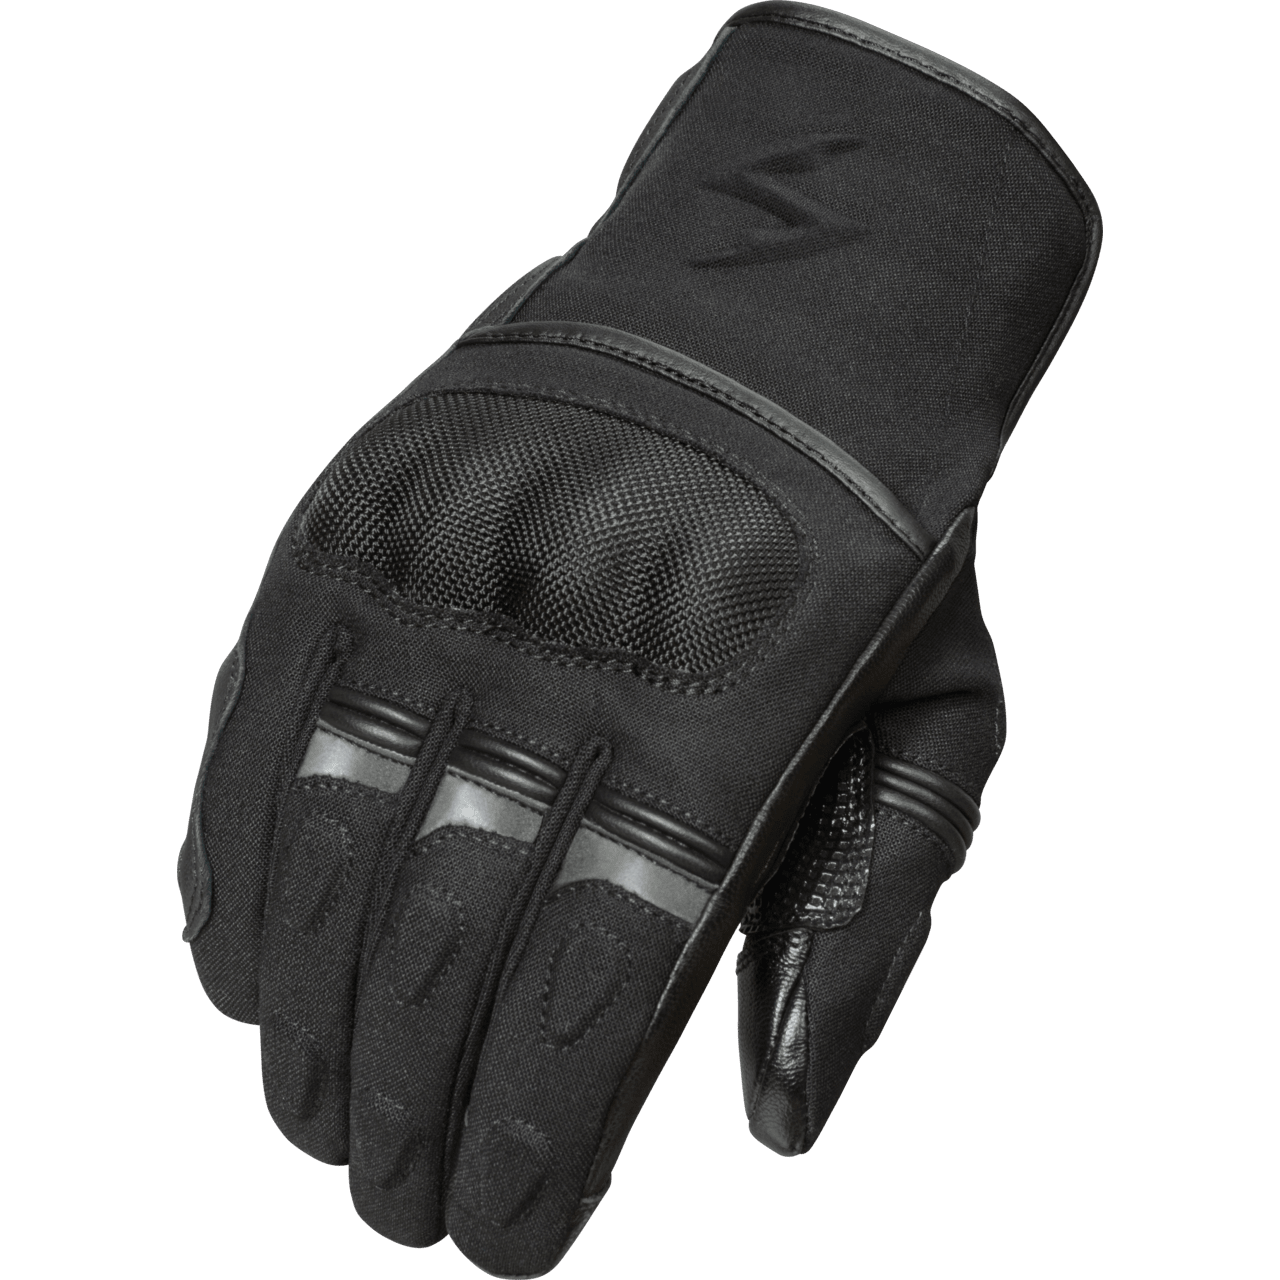 Scorpion Exo Men's Tempest Short Cold Weather Motorcycle Riding Gloves -  Team Motorcycle